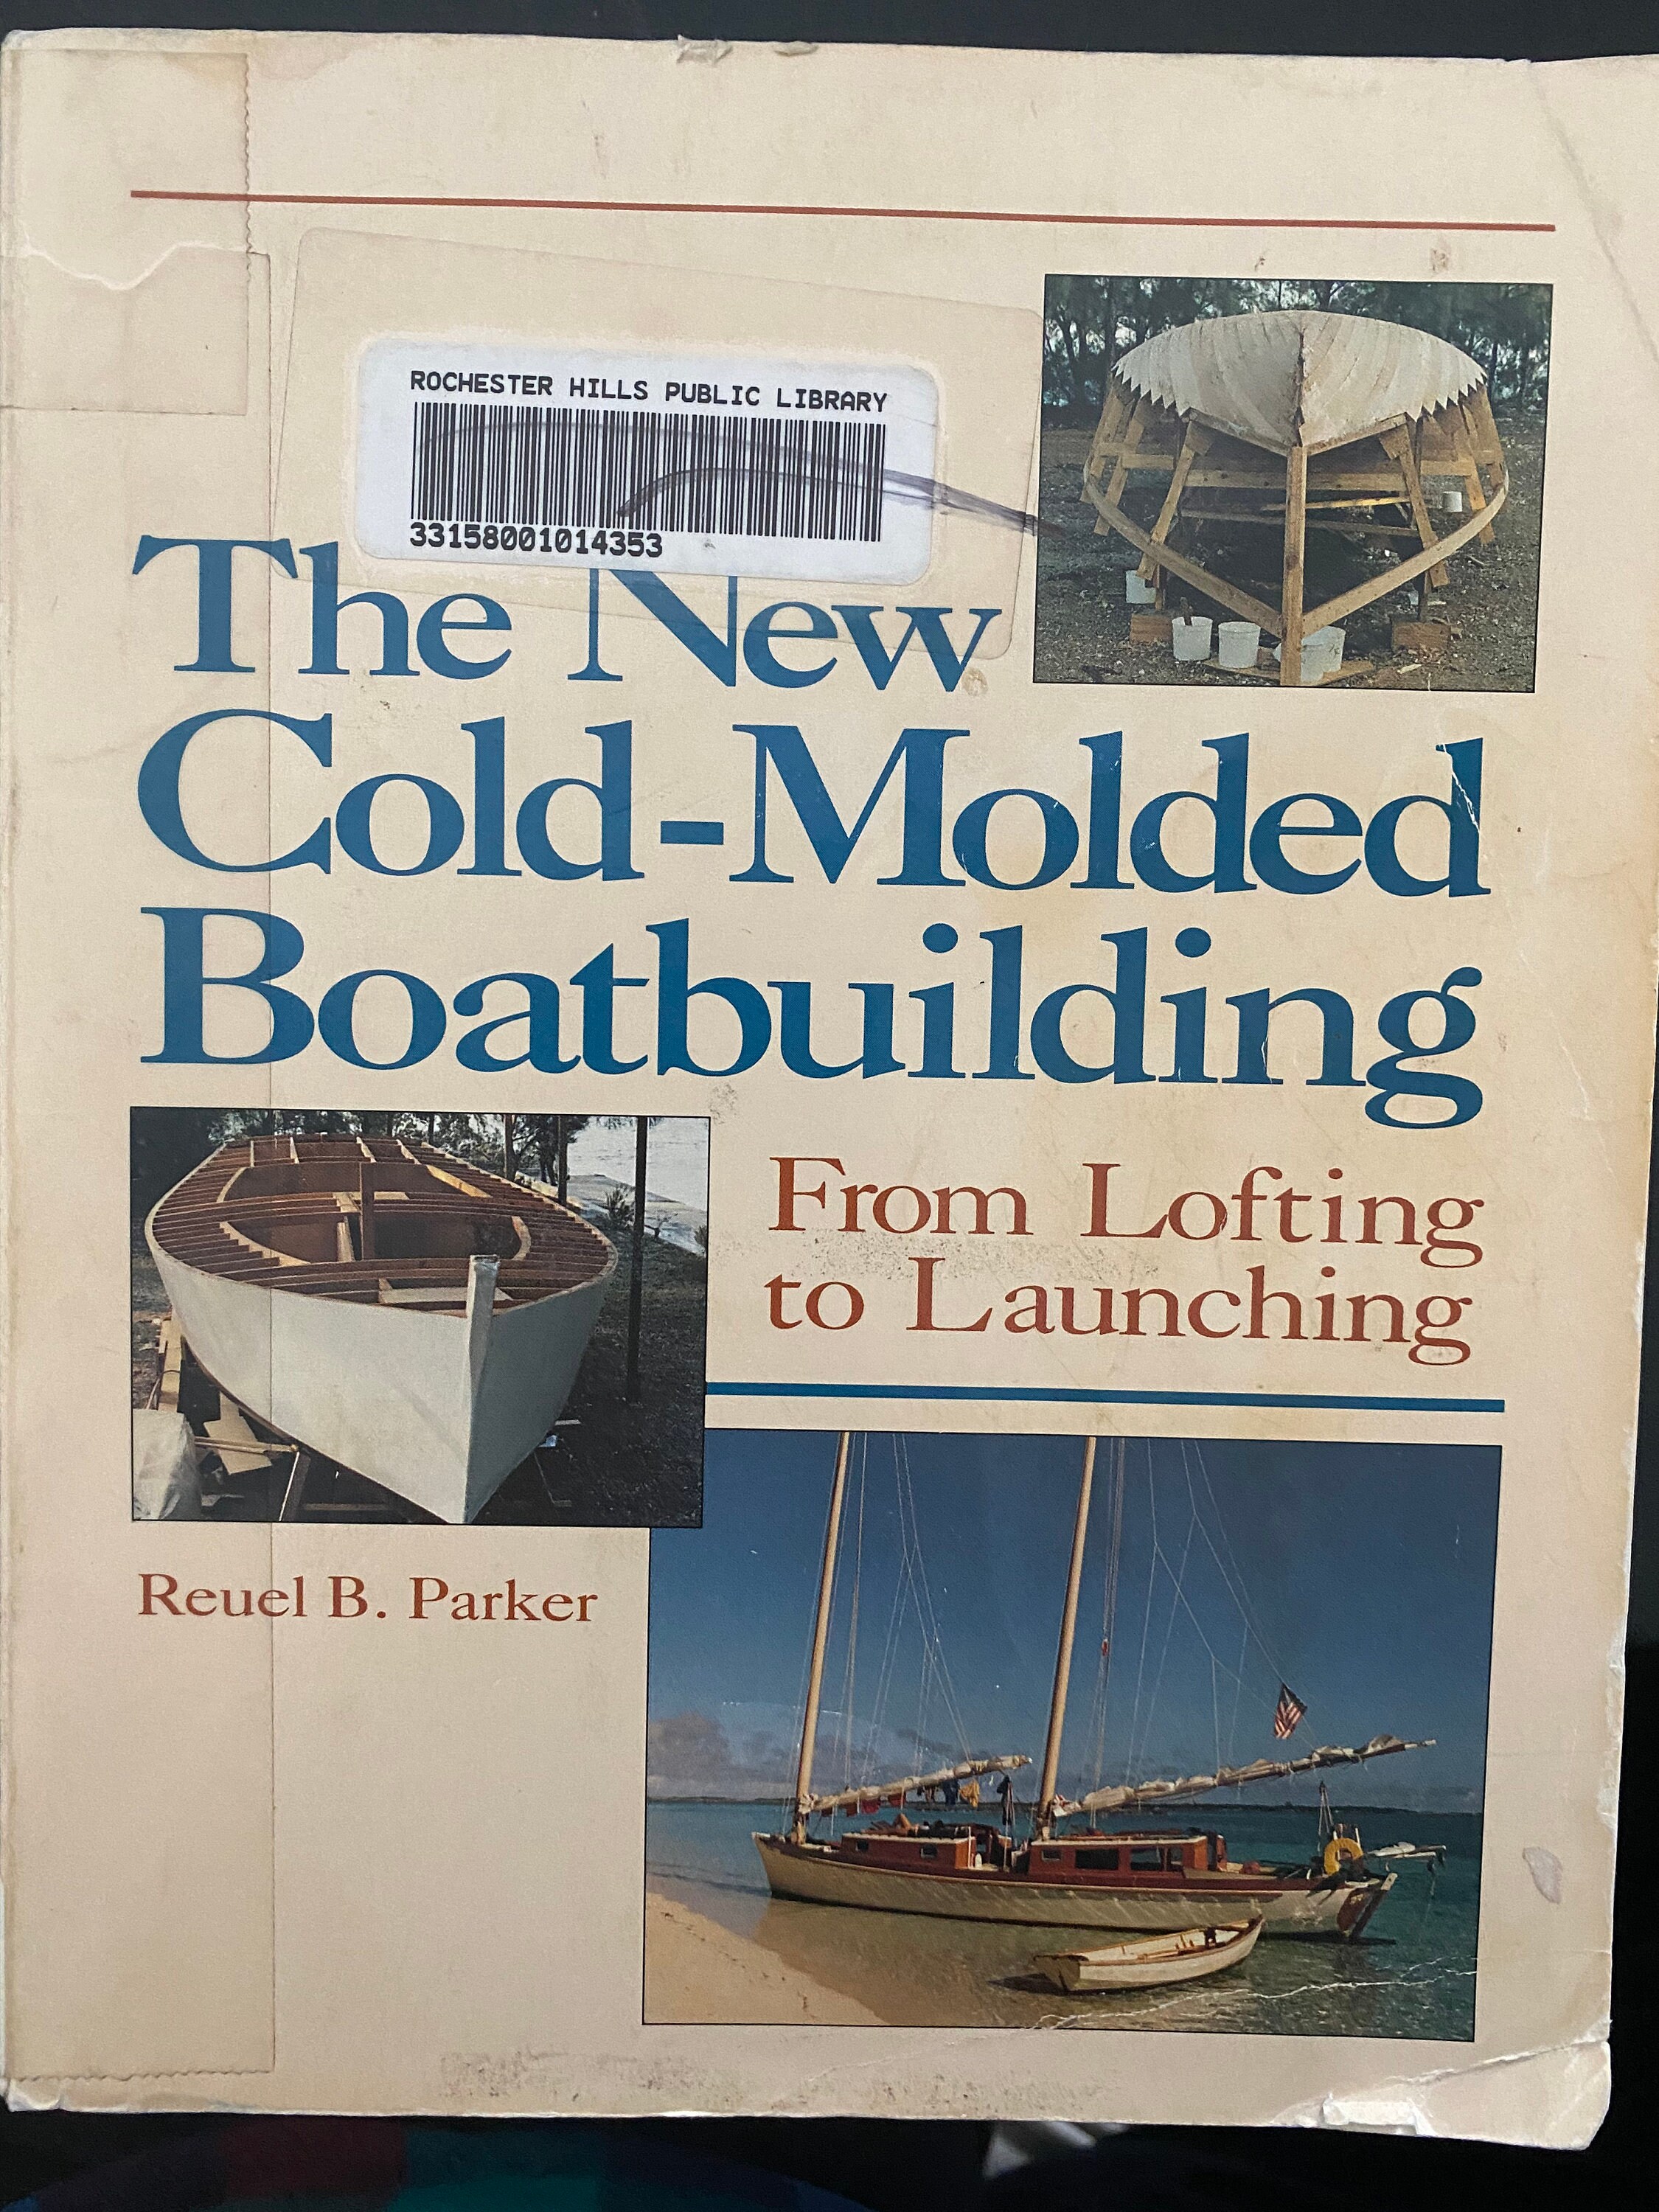 The New Cold Molded Boatbuilding From Lofting to Launching